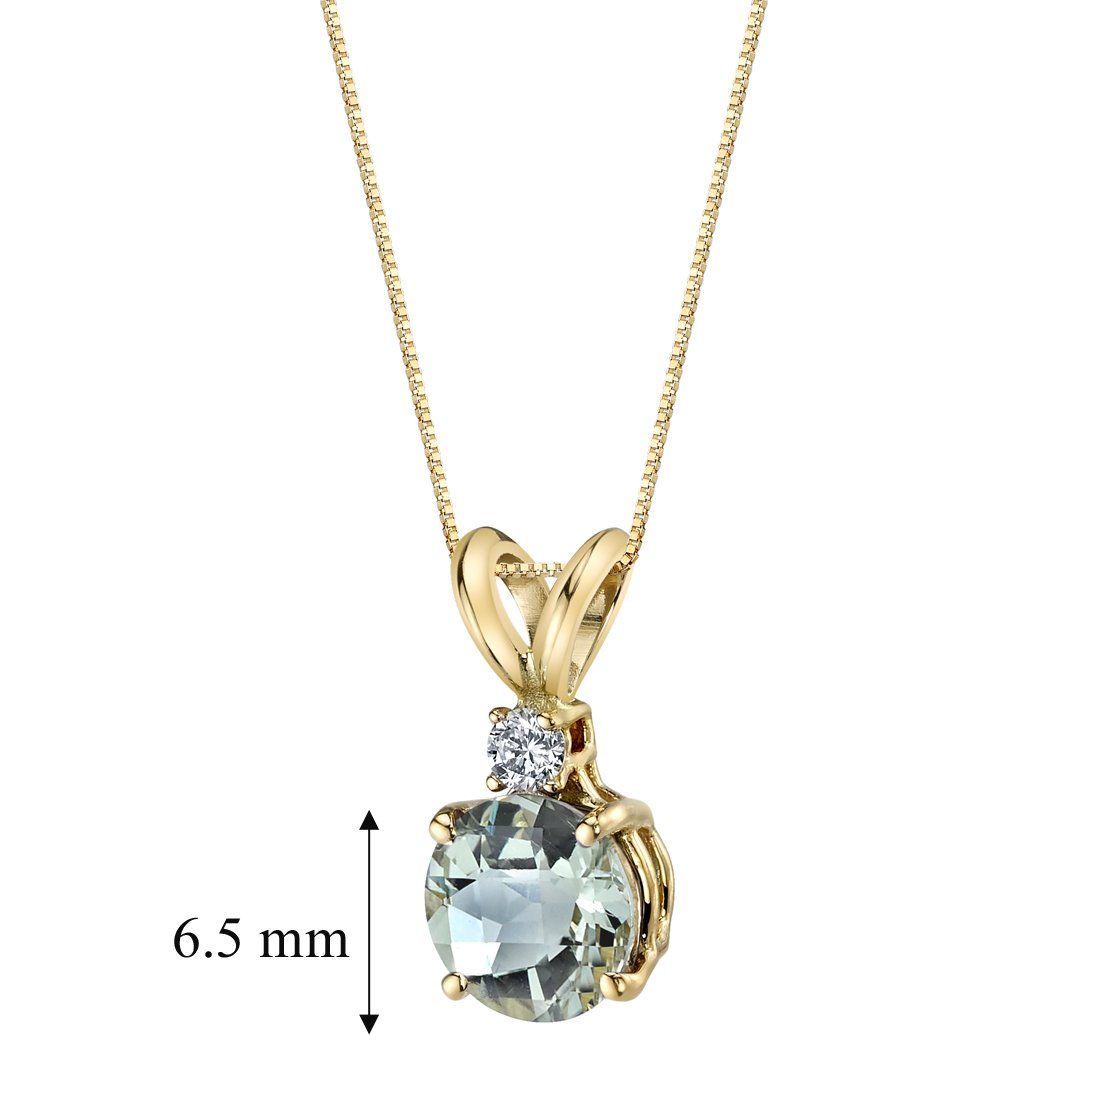 PEORA Green Amethyst with Genuine Diamond Pendant in 14K Yellow Gold, Elegant Solitaire, Round Shape, 6.50mm, 1 Carat total